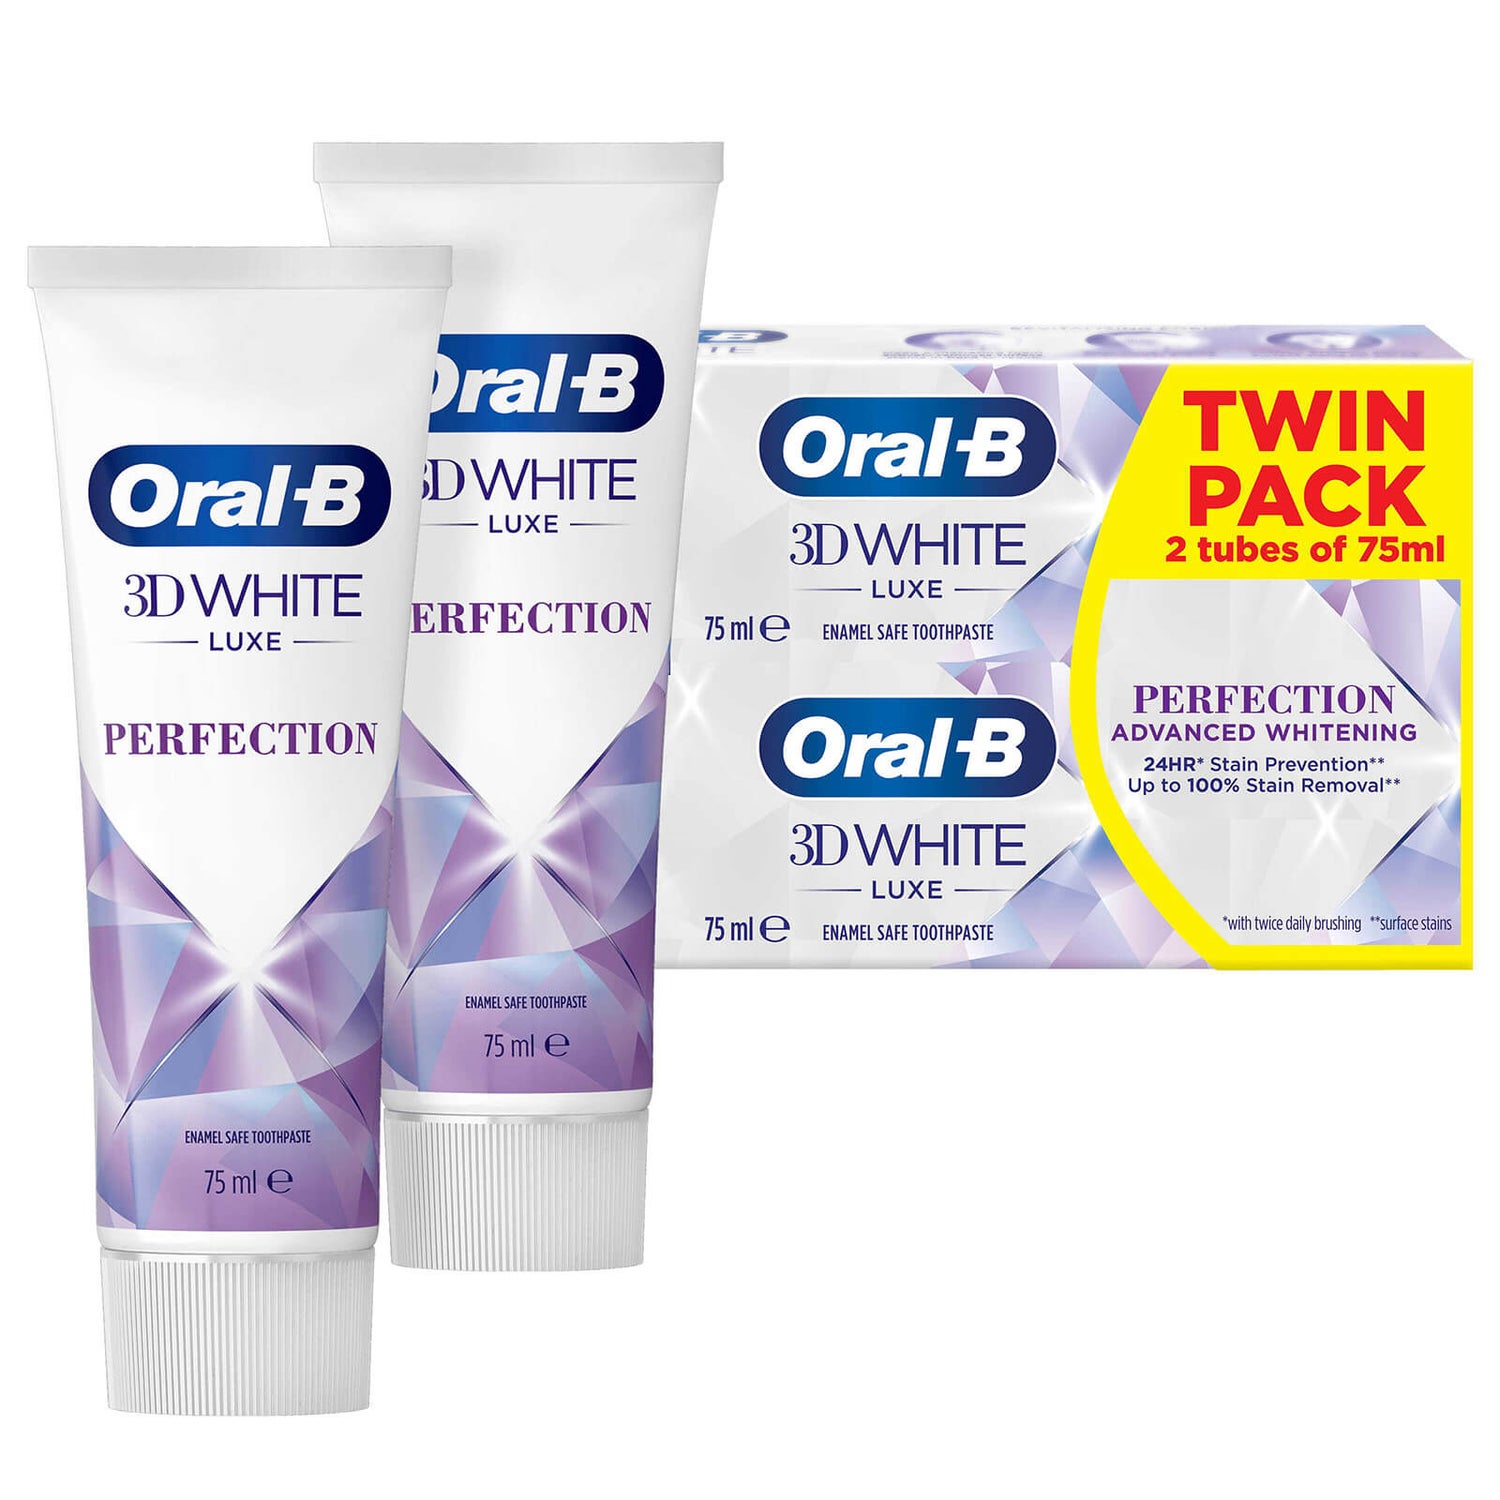 Oral-B 3D White Luxe Perfection Whitening Toothpaste Duo Pack 2X75ML